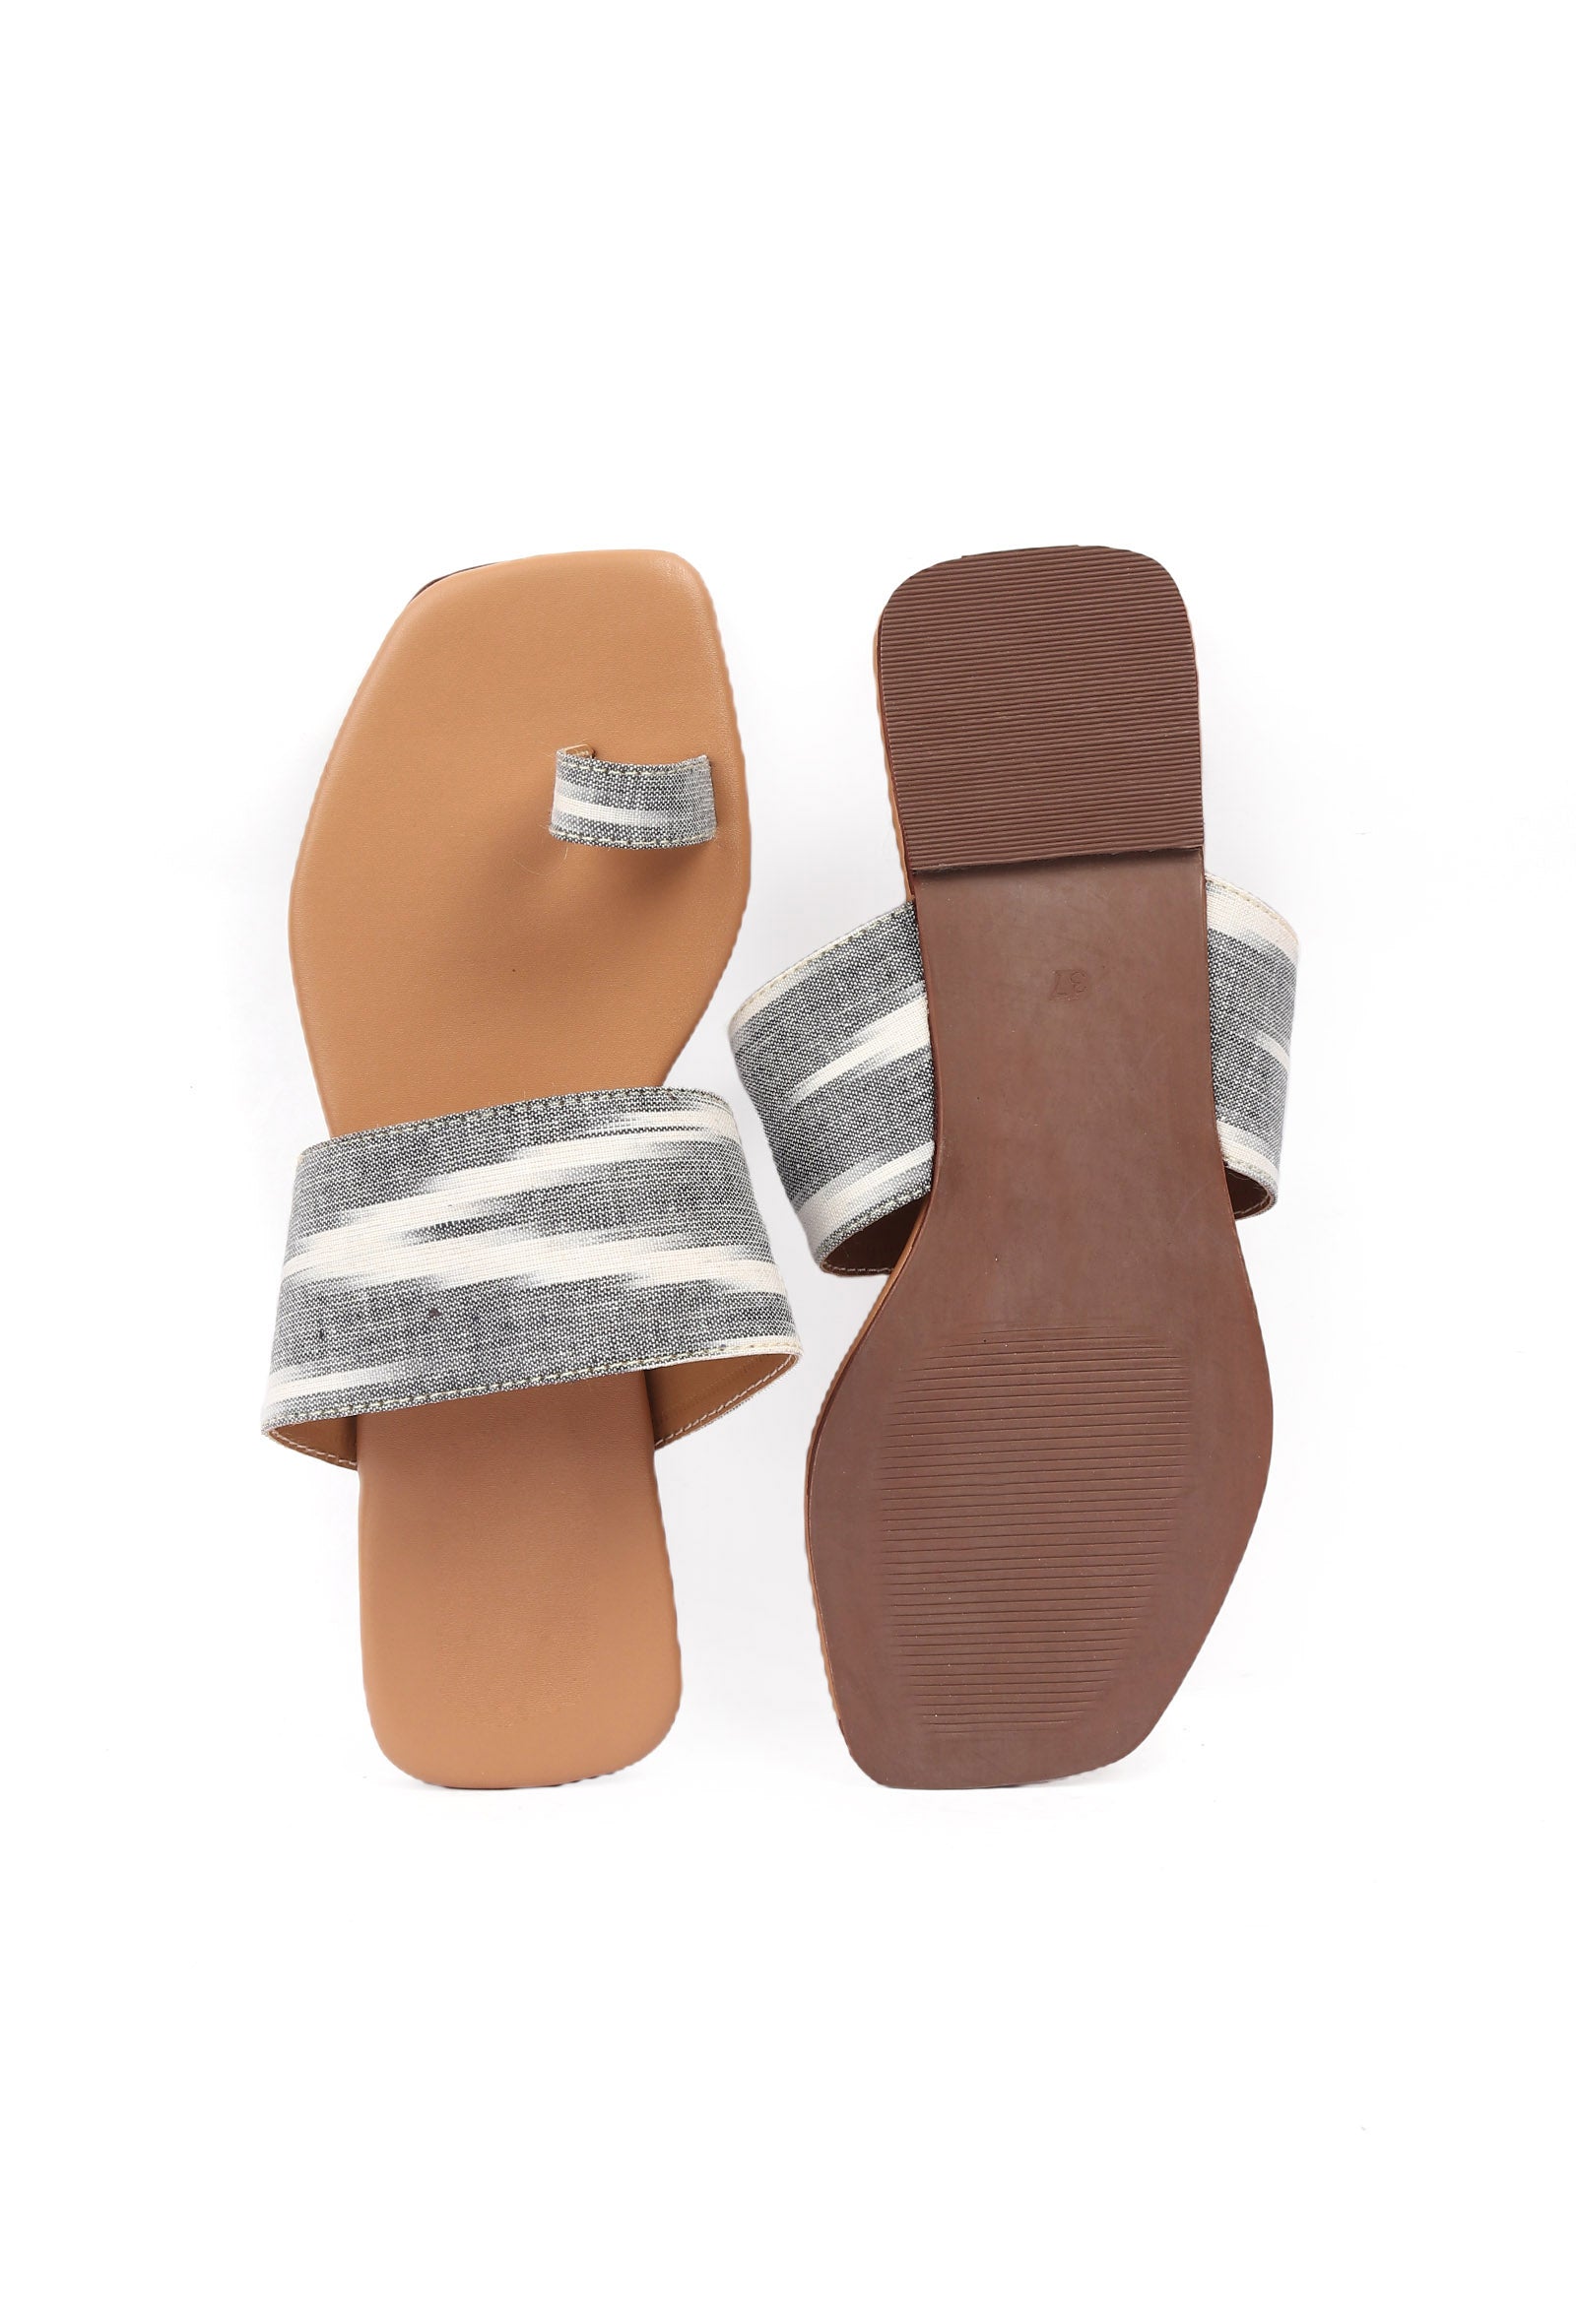 Grey, White & Tawny Brown Ikat One Toe Cruelty Free Leather Flats